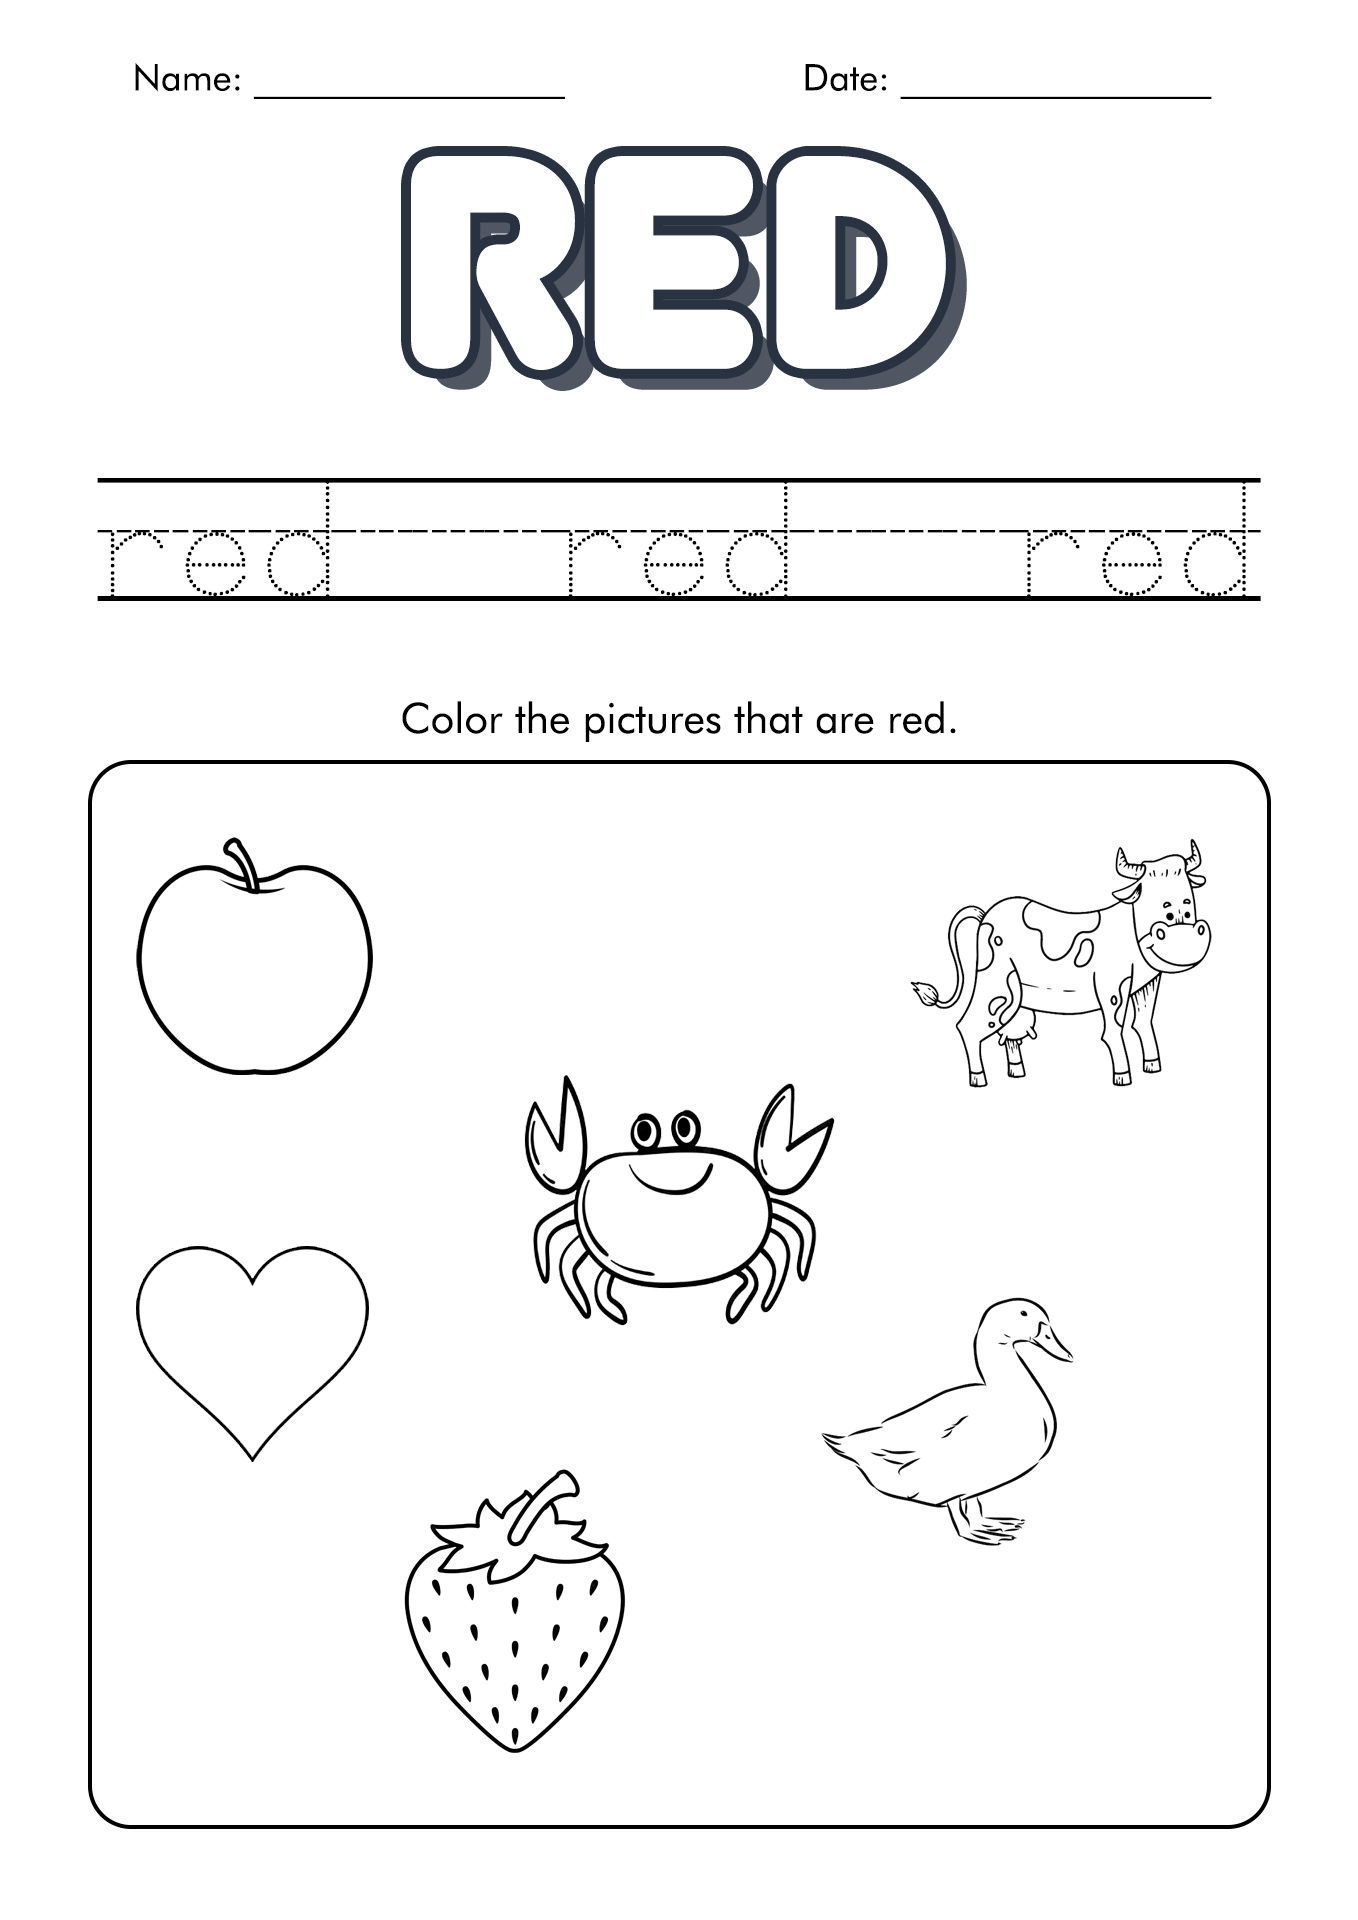 Free Printable Color Red Worksheets For Toddlers